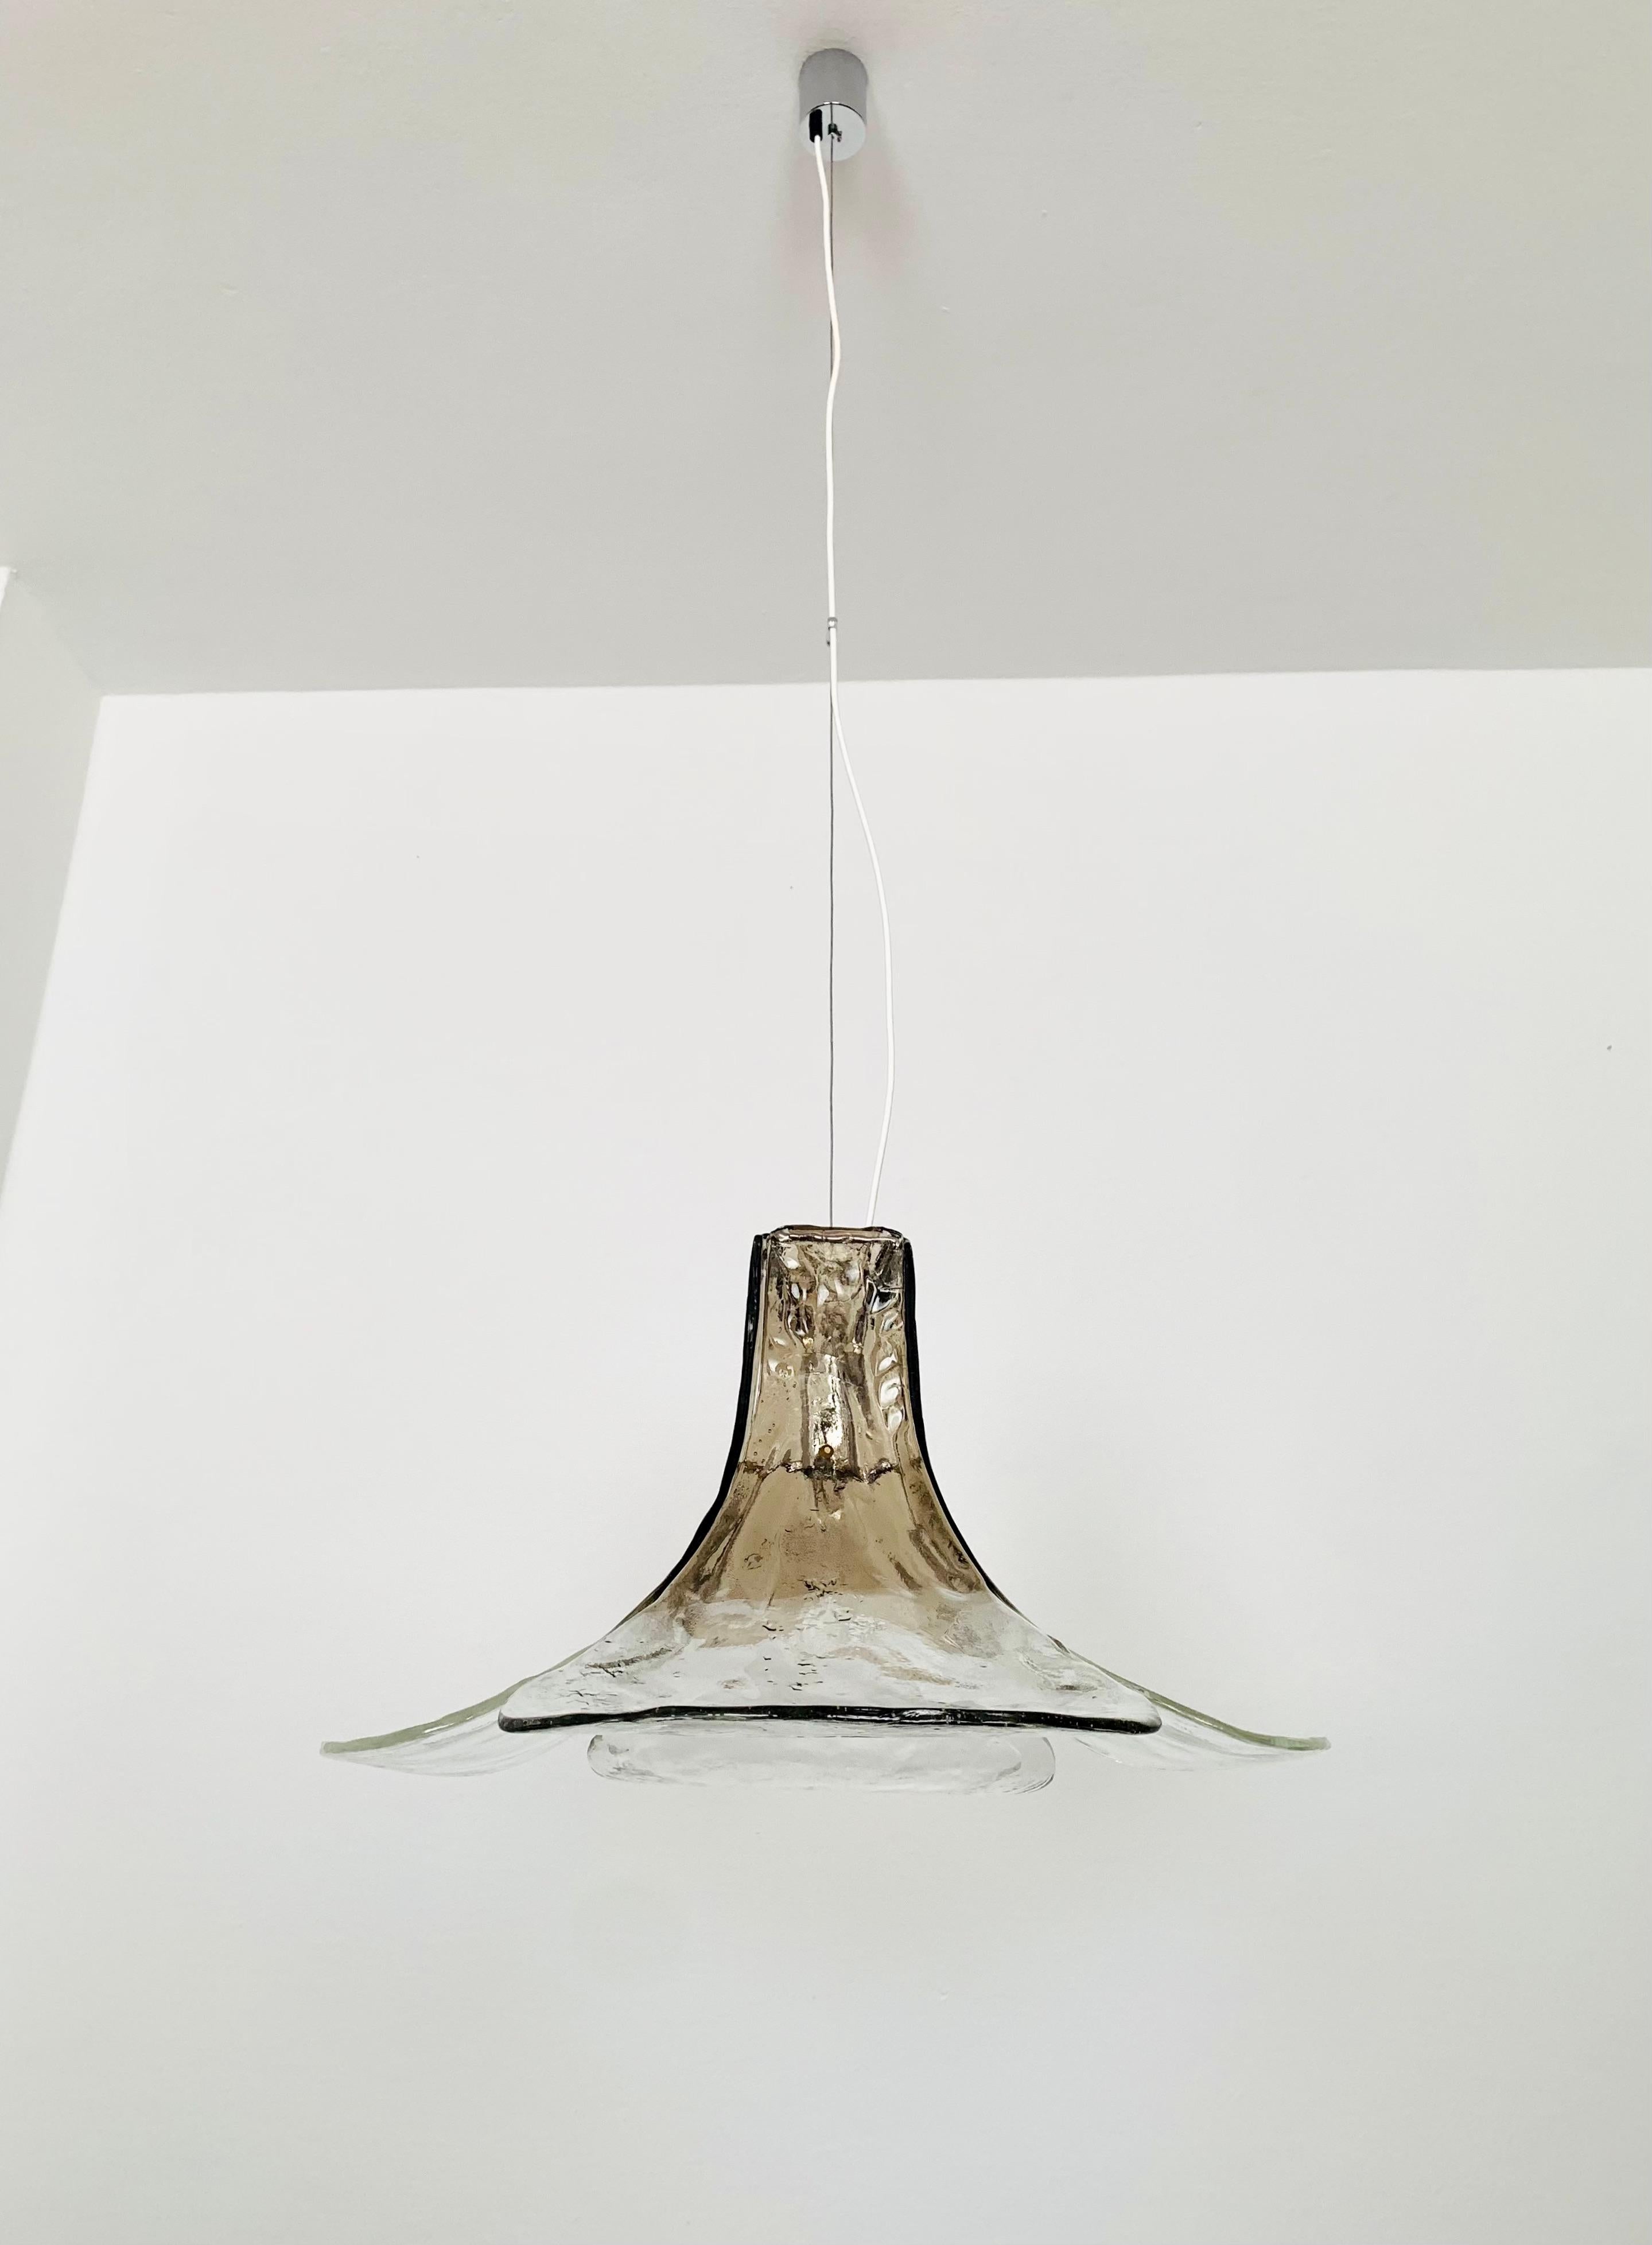 Very nice Murano glass ceiling lamp from the 1960s.
The lamp is very elegant.
The structure of the glasses creates a very sparkling light.
Fantastic design and an asset to any home.

Manufacturer: Mazzega
Design: Carlo Nason

Condition:

Very good